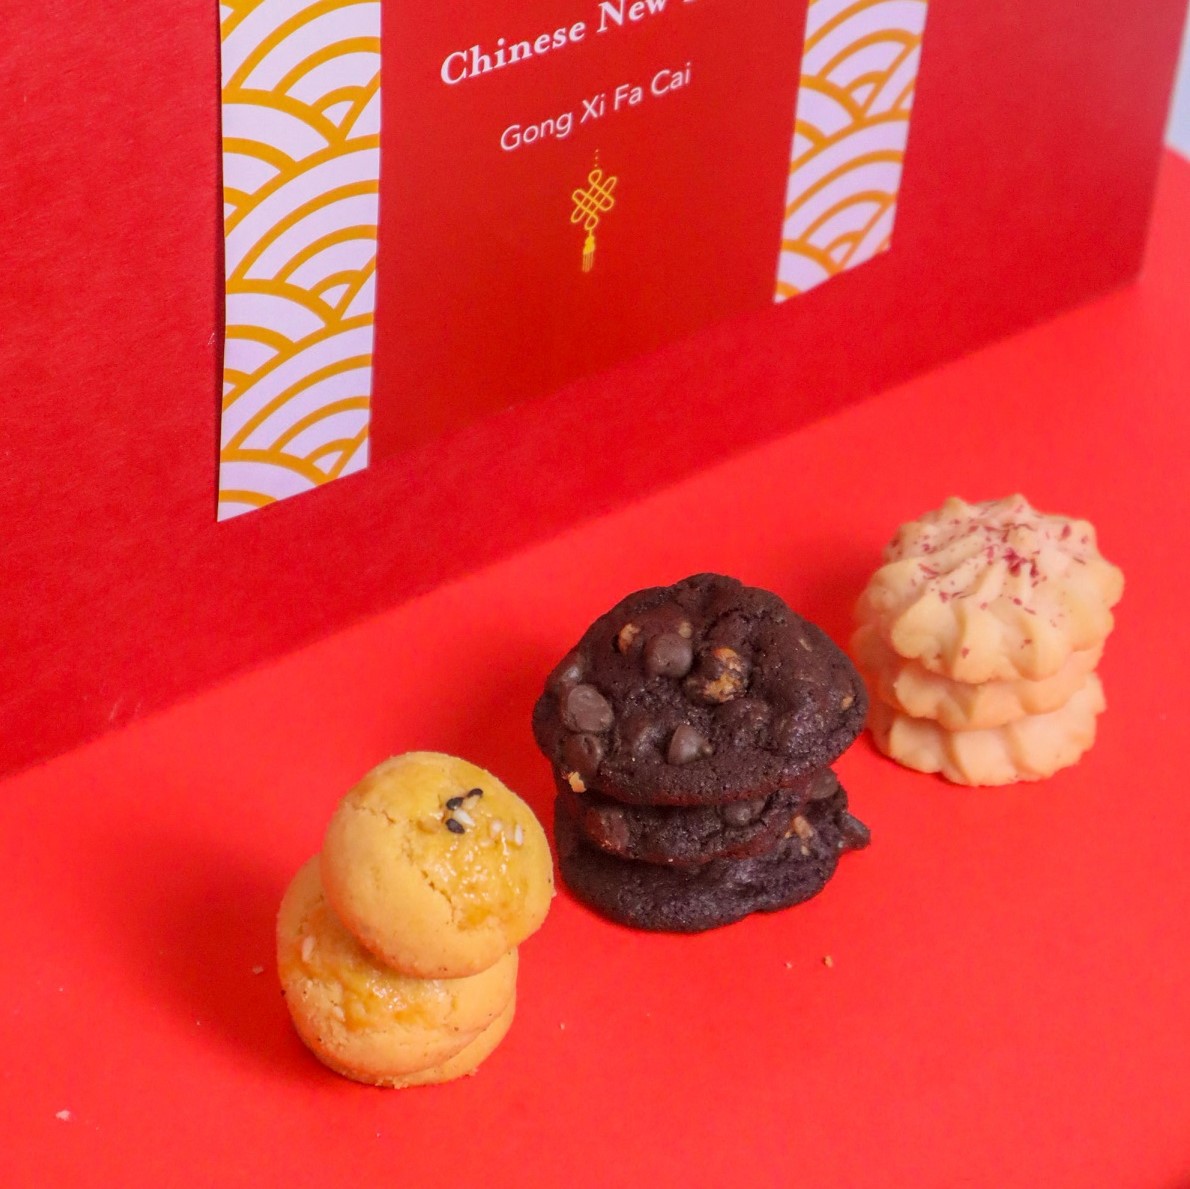 Dignity’s lychee blossom, salted egg yolk, and signature chocolate cookies come in two different sizes. Small cans are priced at RM17 and large cans at RM33. – Pic courtesy of Dignity